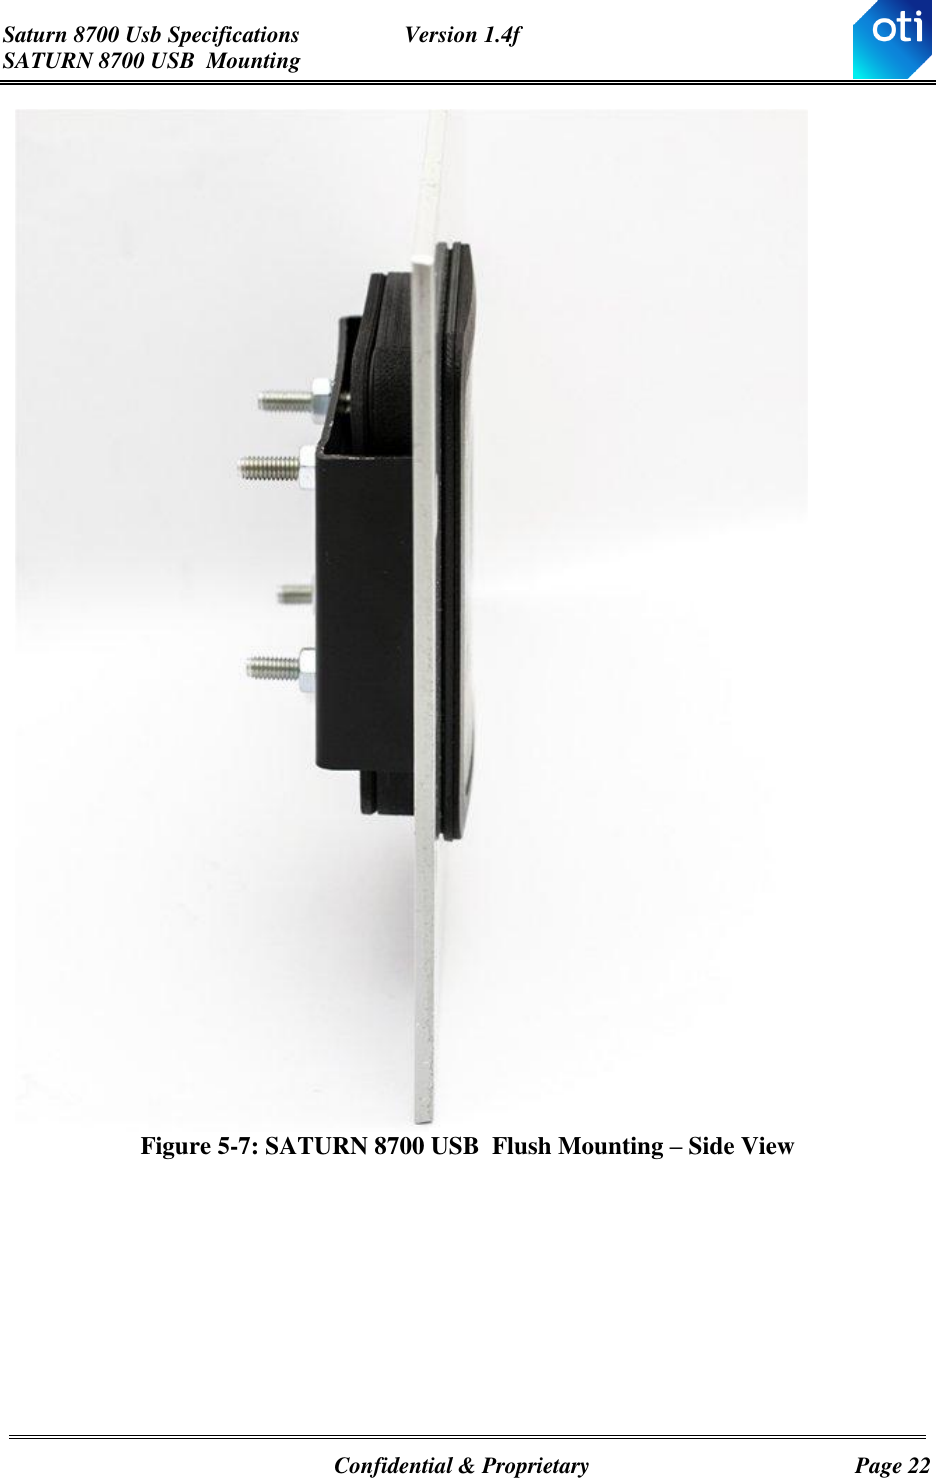 Saturn 8700 Usb Specifications  Version 1.4f SATURN 8700 USB  Mounting   Confidential &amp; Proprietary  Page 22  Figure 5-7: SATURN 8700 USB  Flush Mounting – Side View   